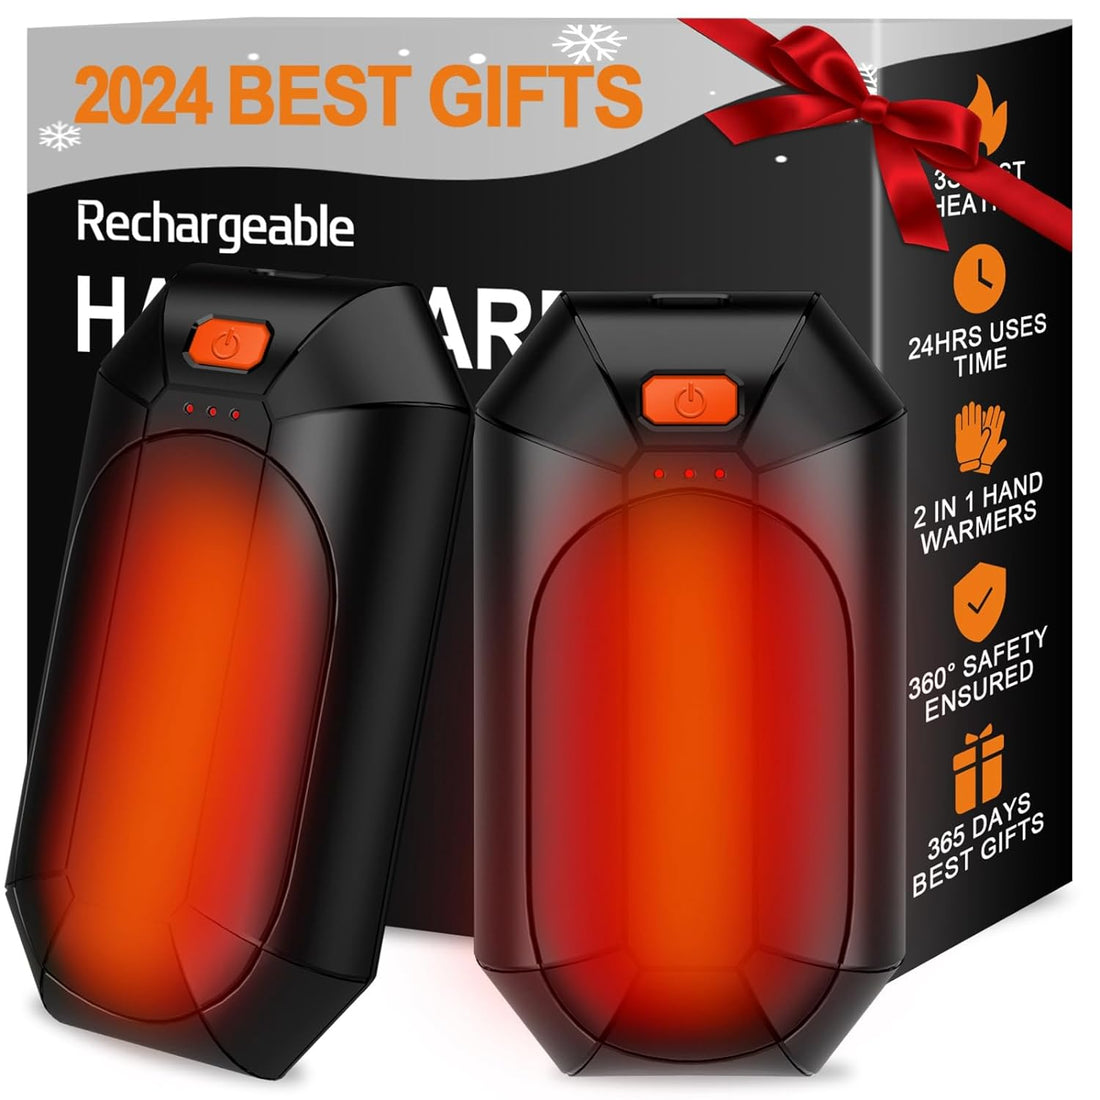 2 Pack Hand Warmers Rechargeable,Portable Electric Hand Warmers Reusable,USB Handwarmers,Outdoor/Indoor/Working/Studying/Camping/Hunting/Golf/Pain Relief/Games/Warm Gifts for Men Women Kids Christmas